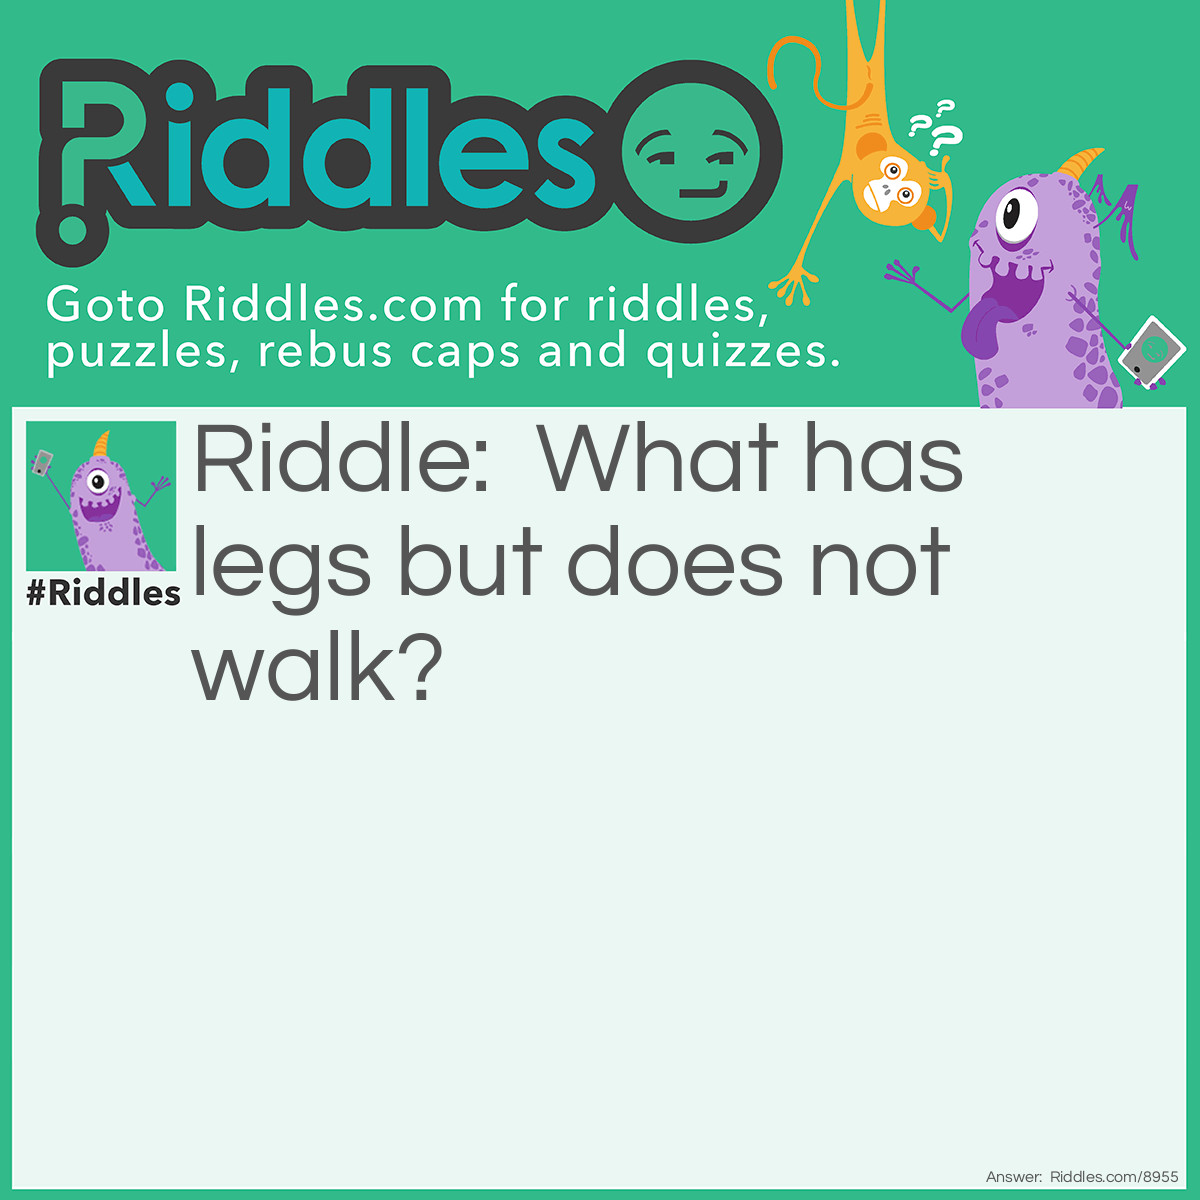 Riddle: What has legs but does not walk? Answer: A bed?